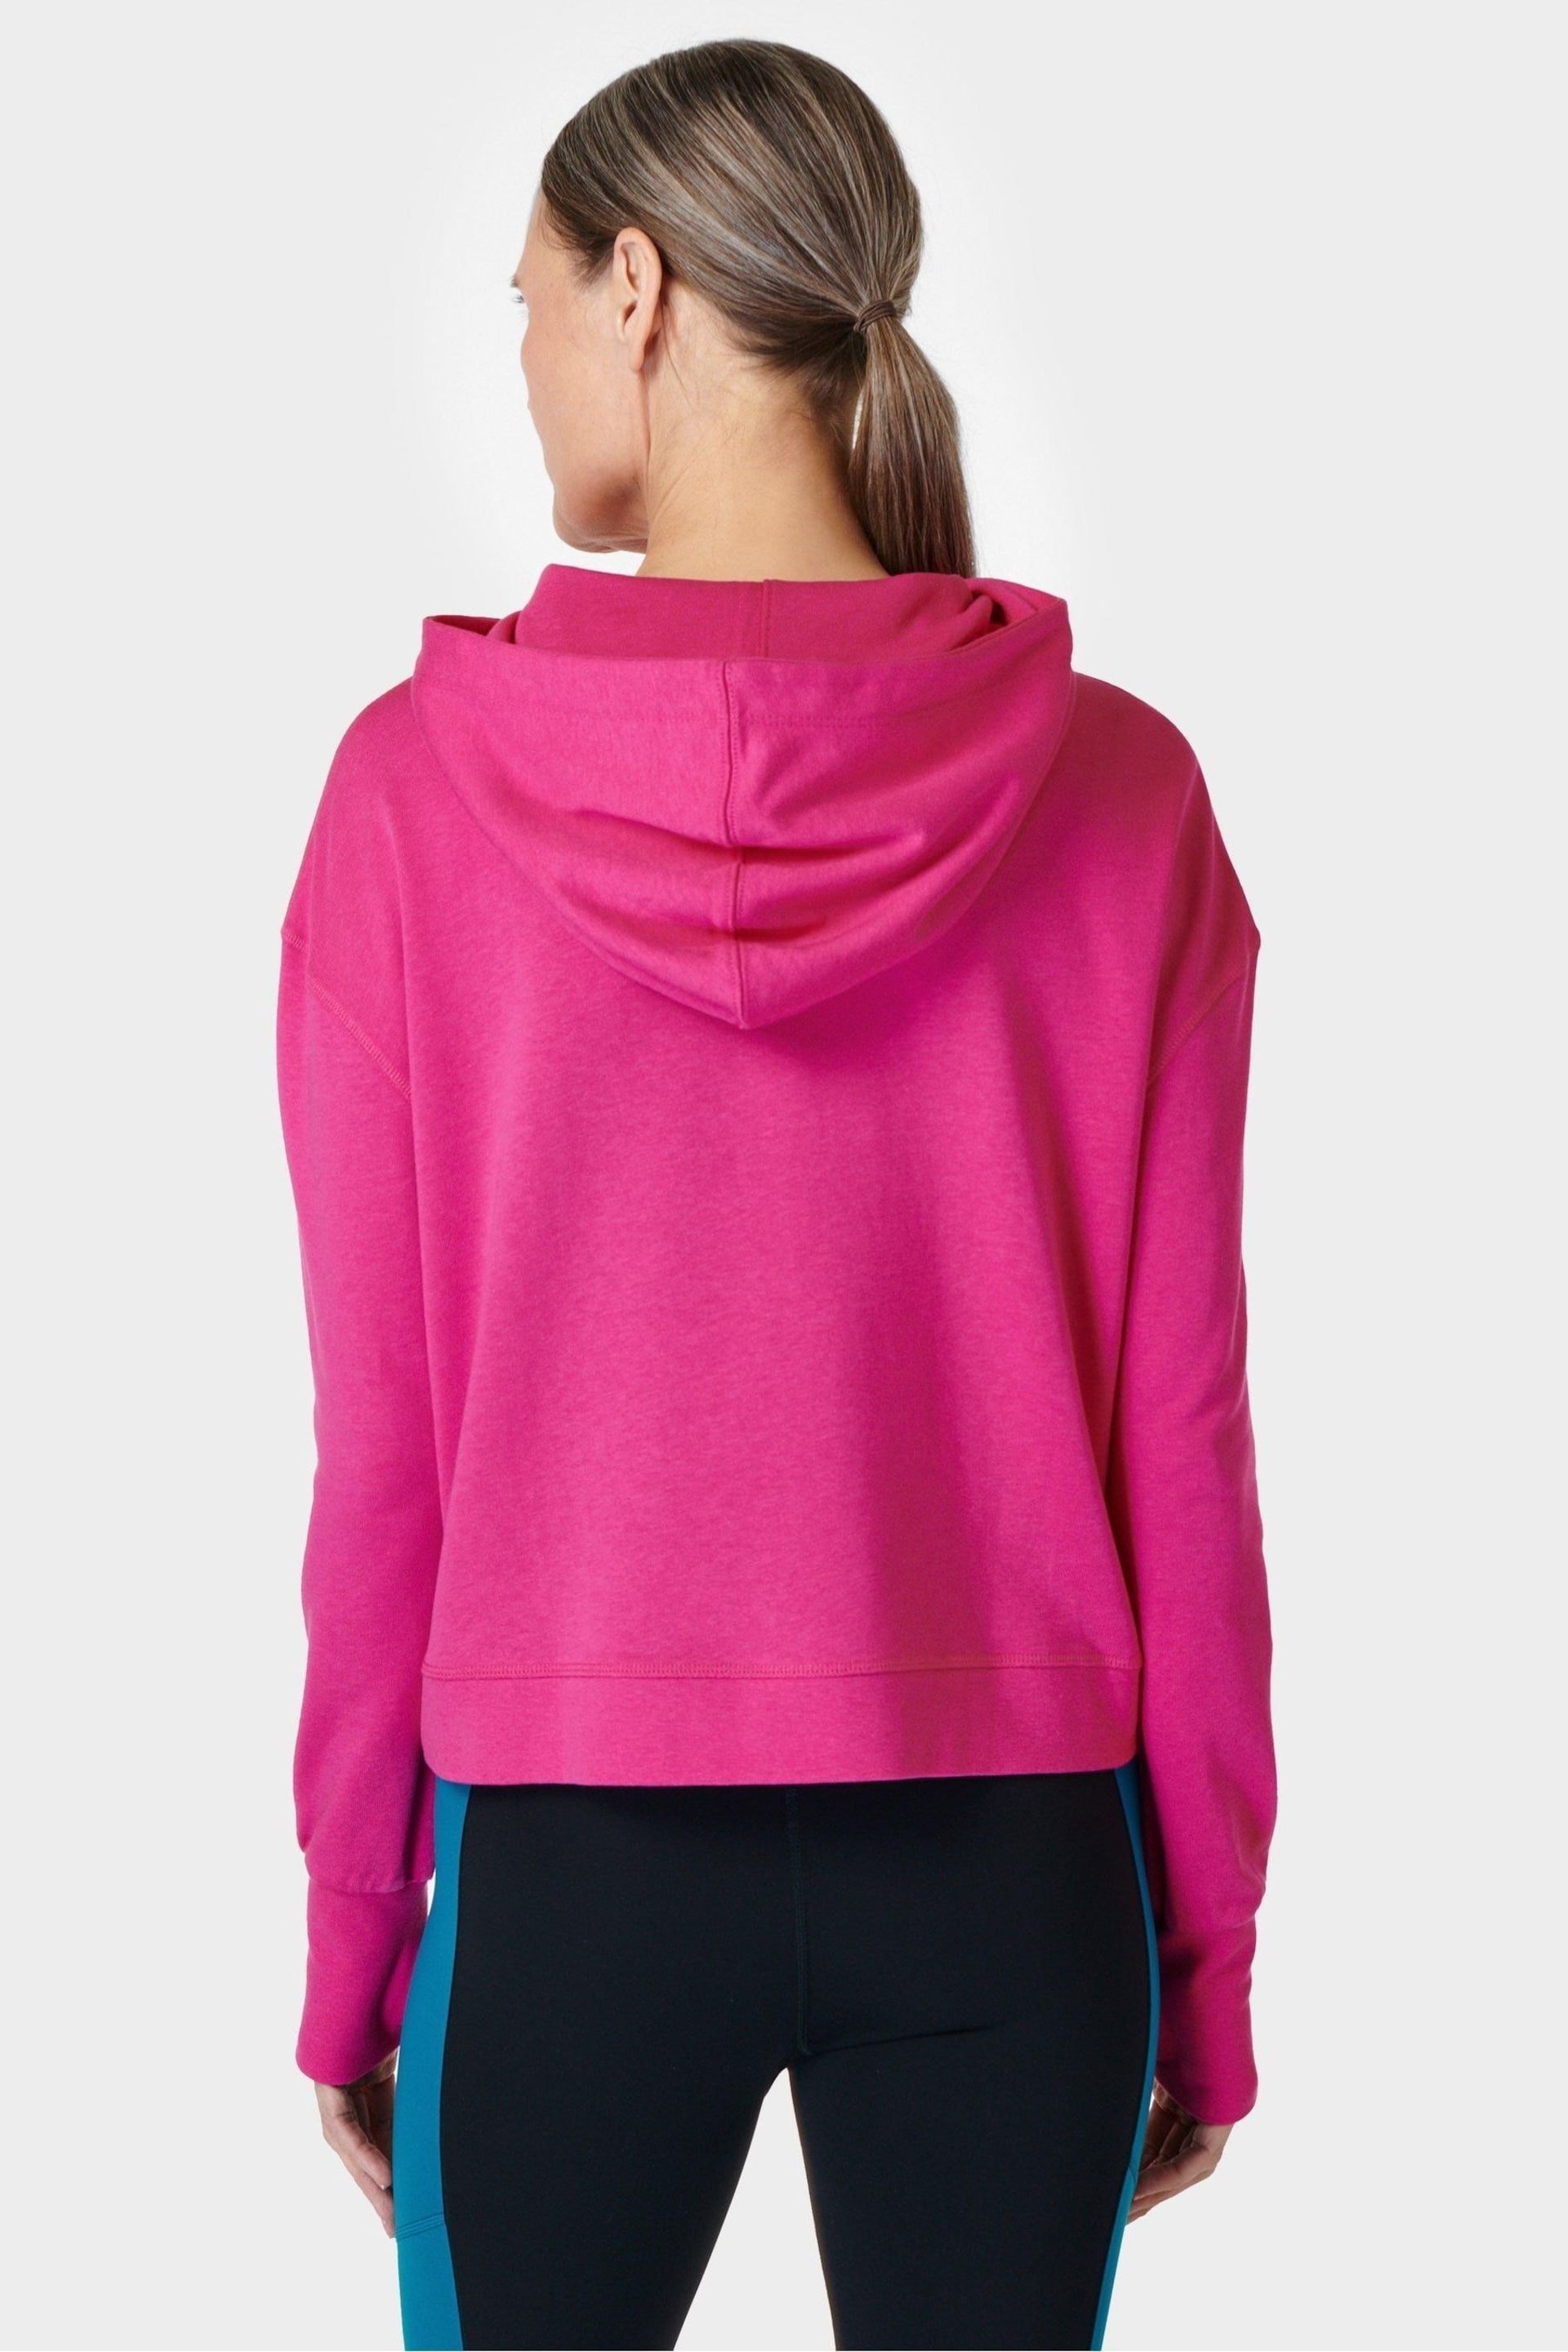 Sweaty Betty Beet Pink After Class Hoodie - Image 3 of 7